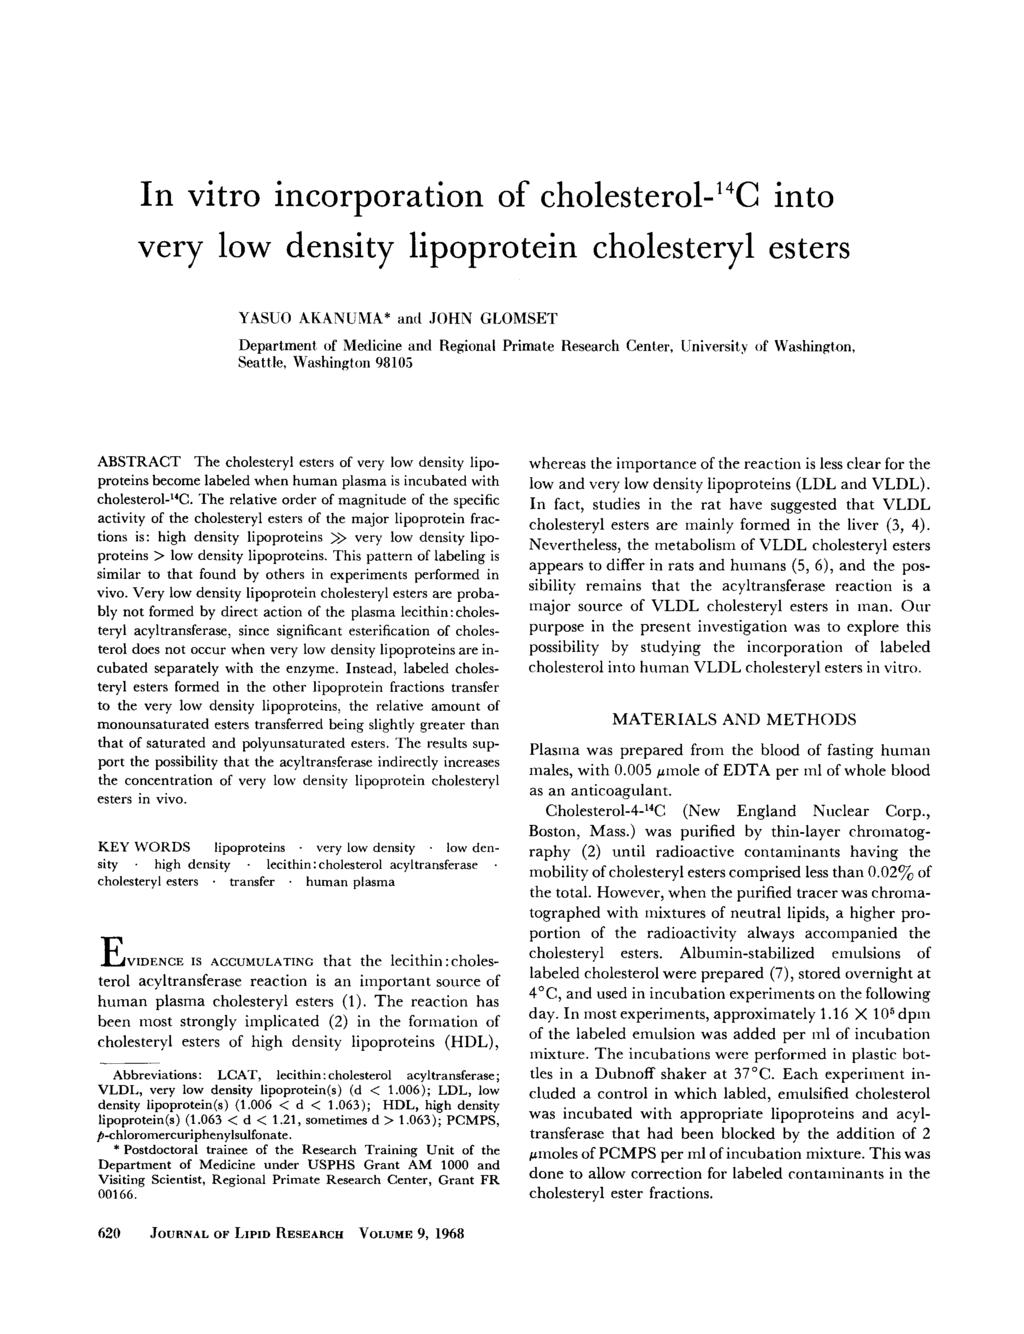 In vitro incorporation of ch~lesterol-'~c into very low density lipoprotein cholesteryl esters YASUO AKANUMA* and JOHN GLOMSET Department of Medicine and Regional Primate Research Center, University